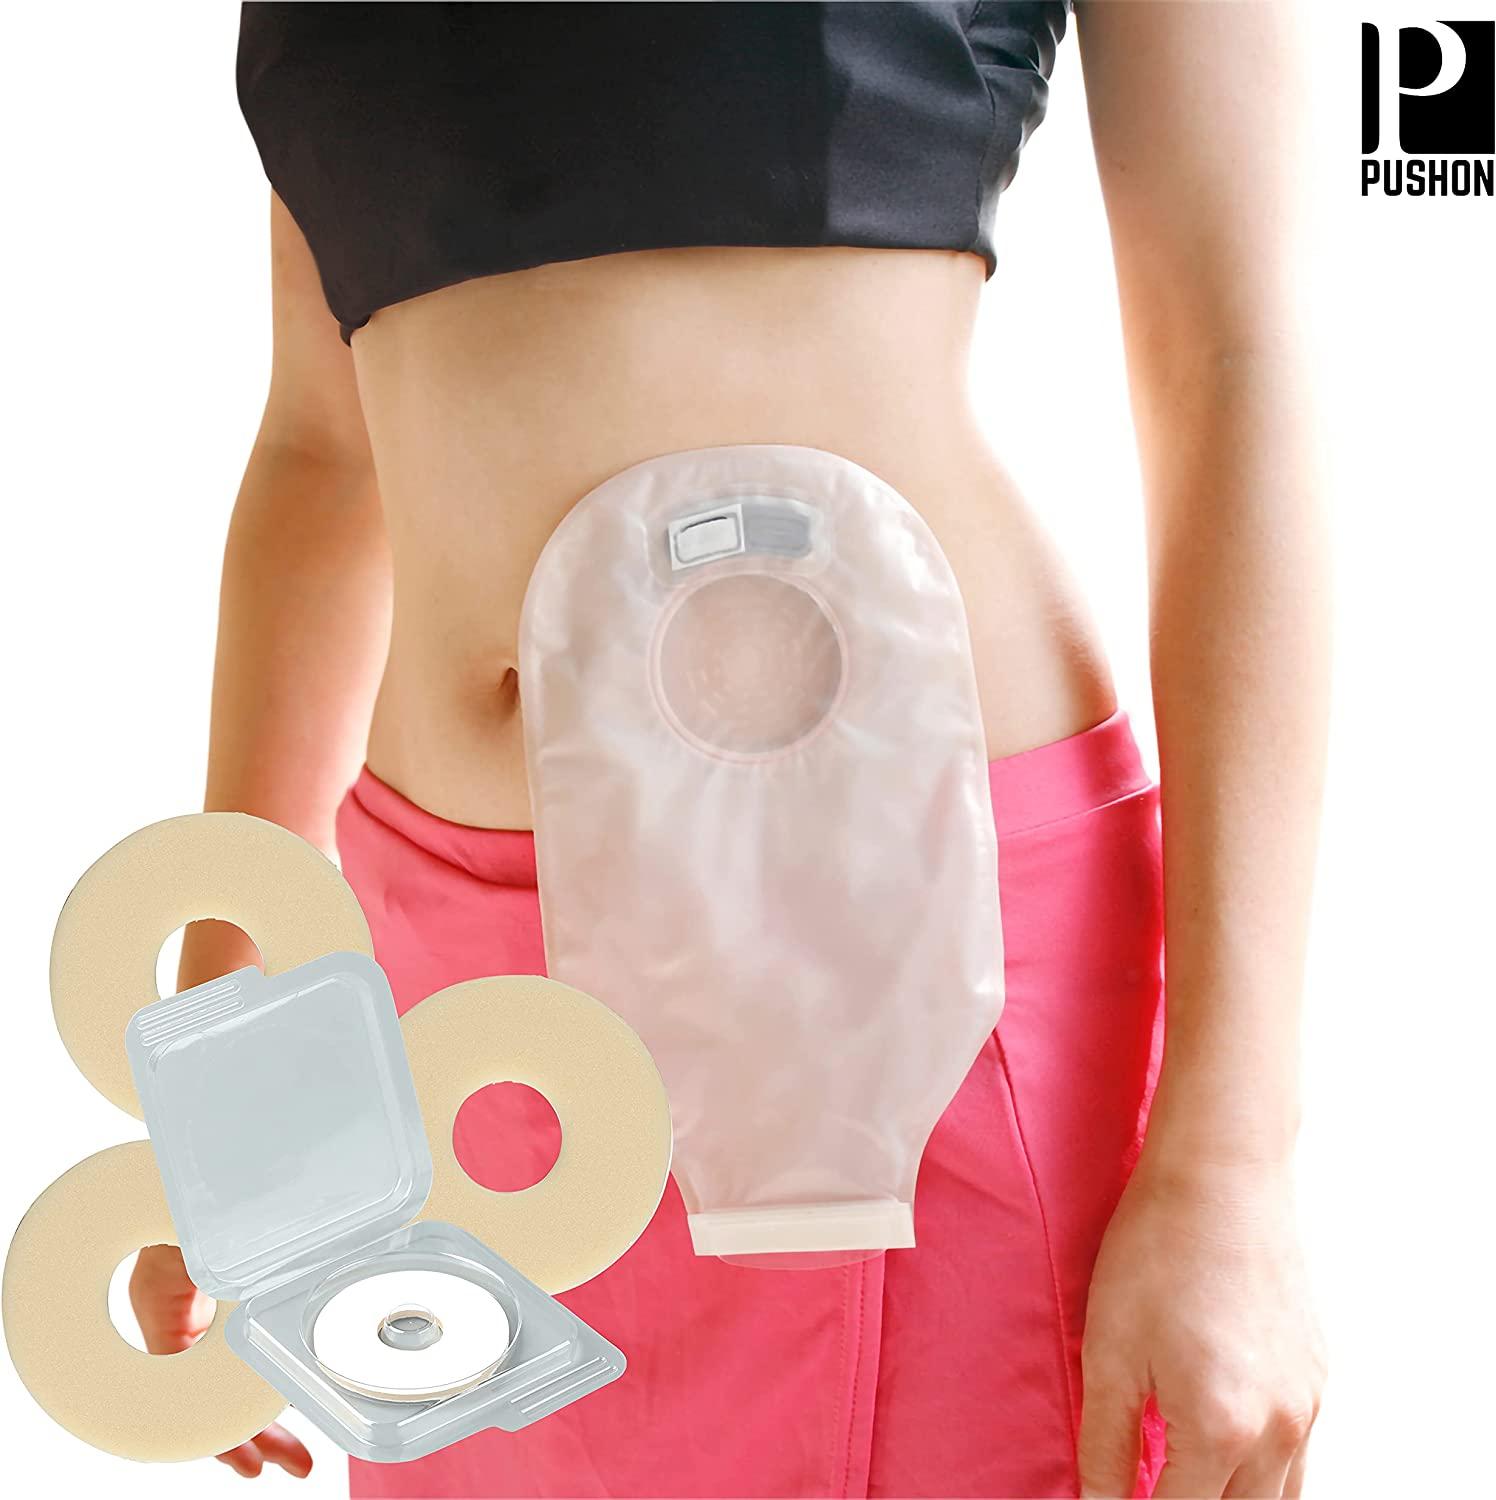 What you need to know about ileostomy/colostomy bags and stomas | Metro News